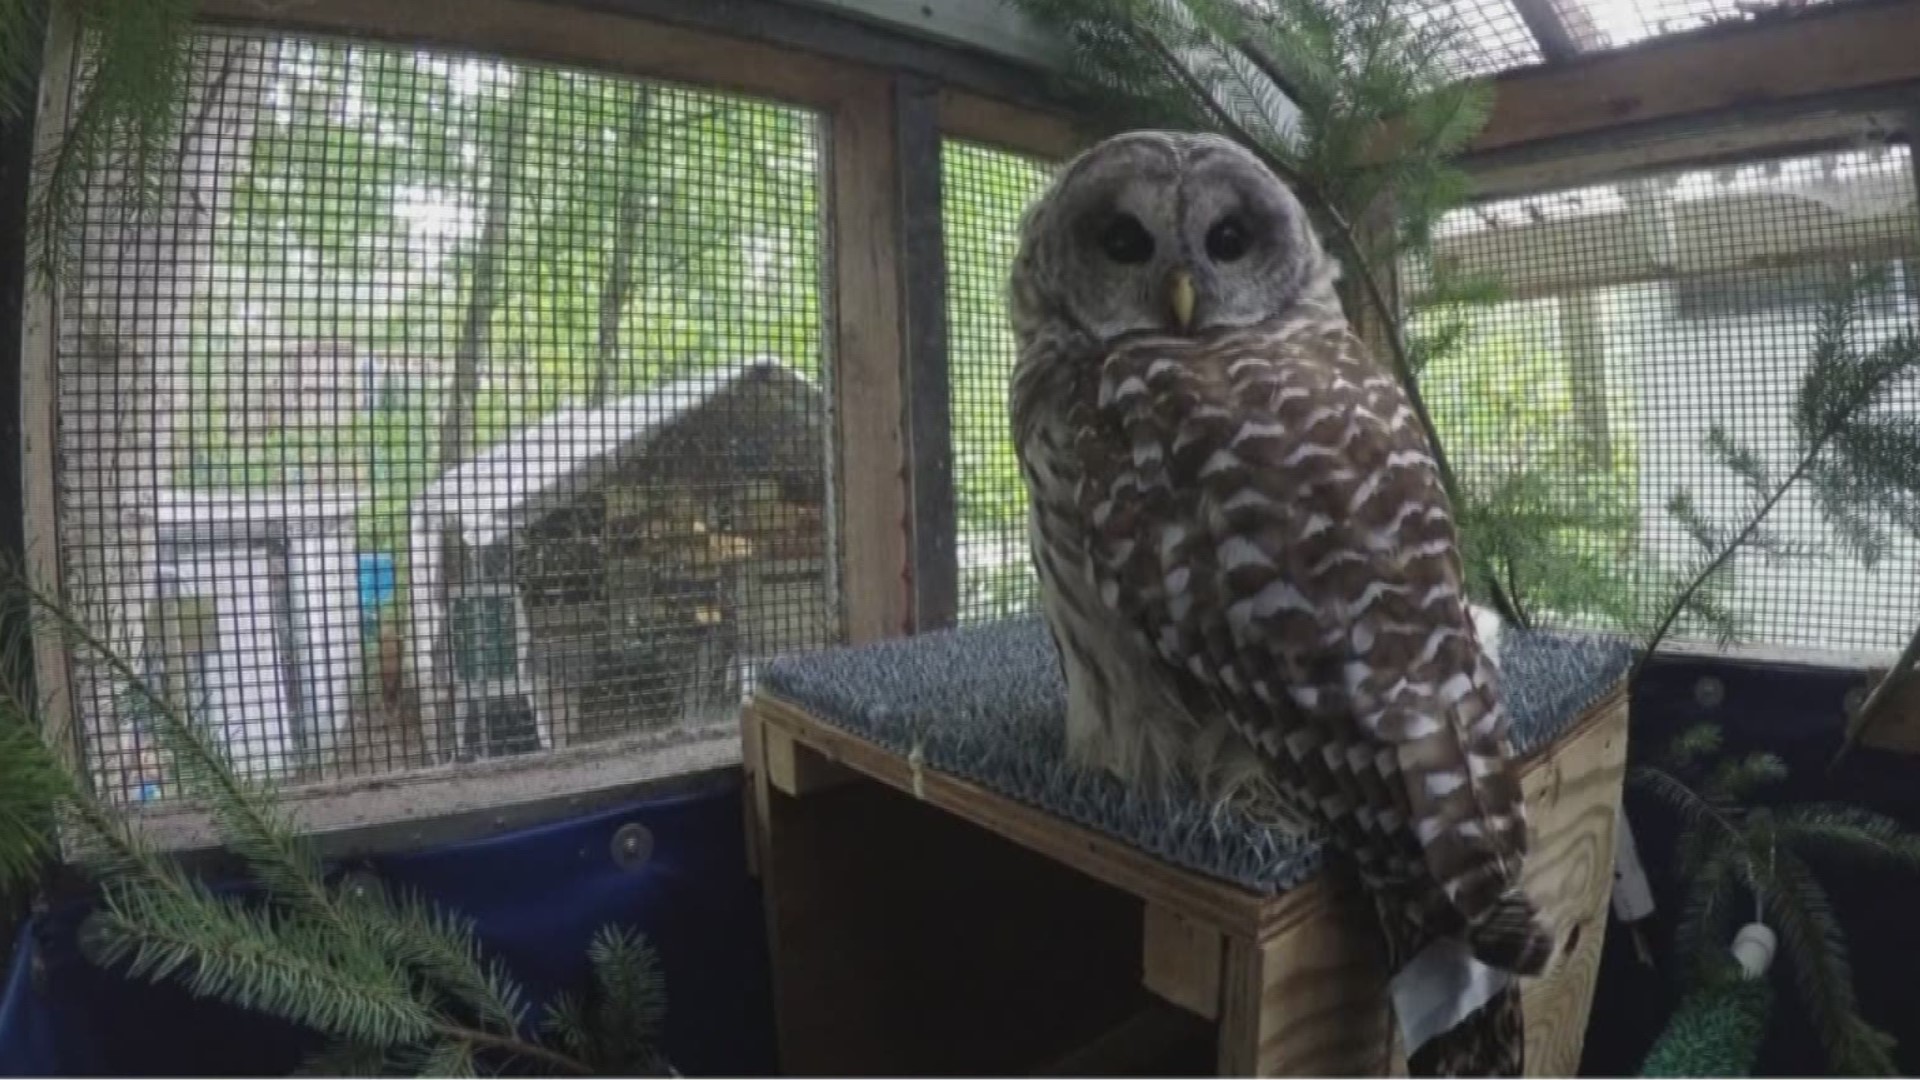 Owl rescued from UW campus is expected to make a full recovery.